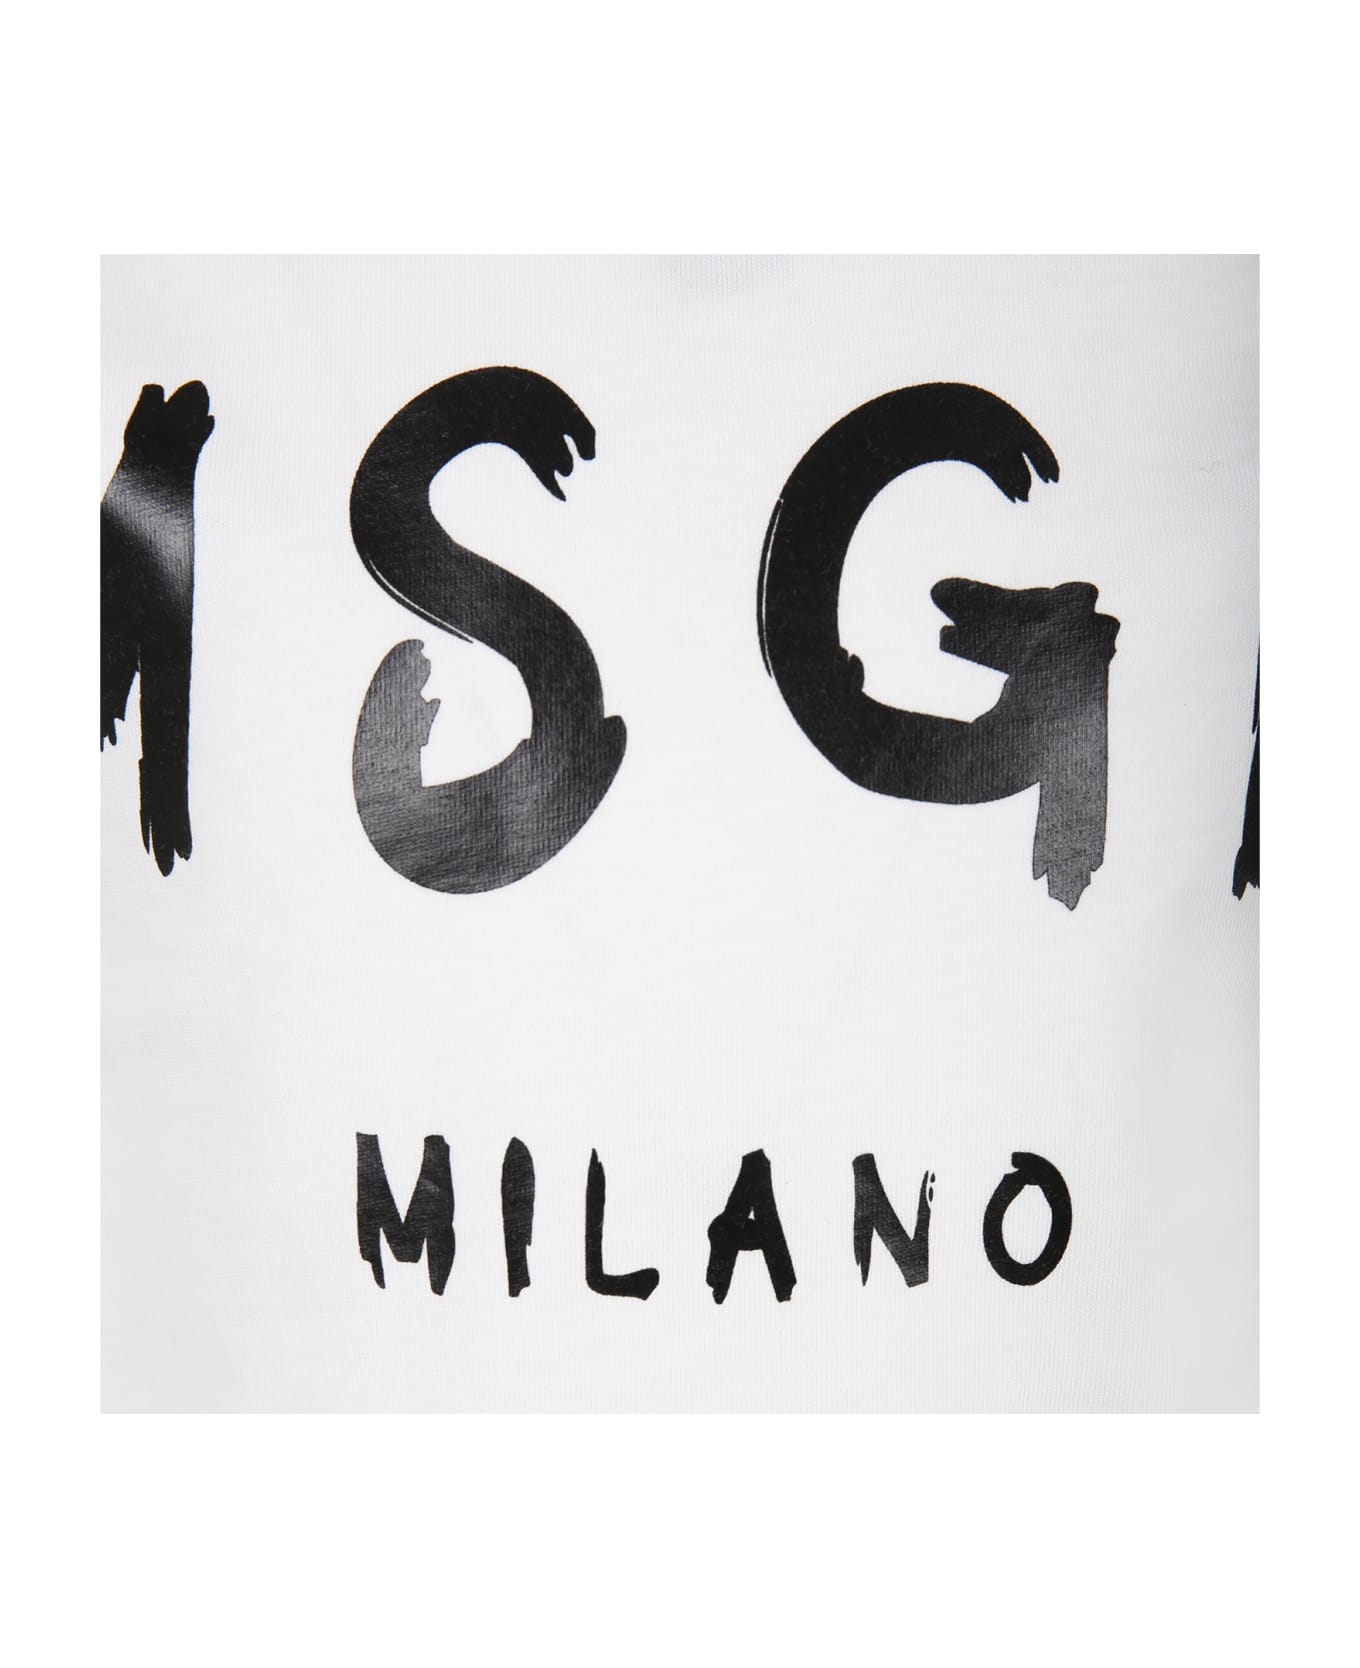 MSGM White T-shirt For Kids With Logo - Bianco